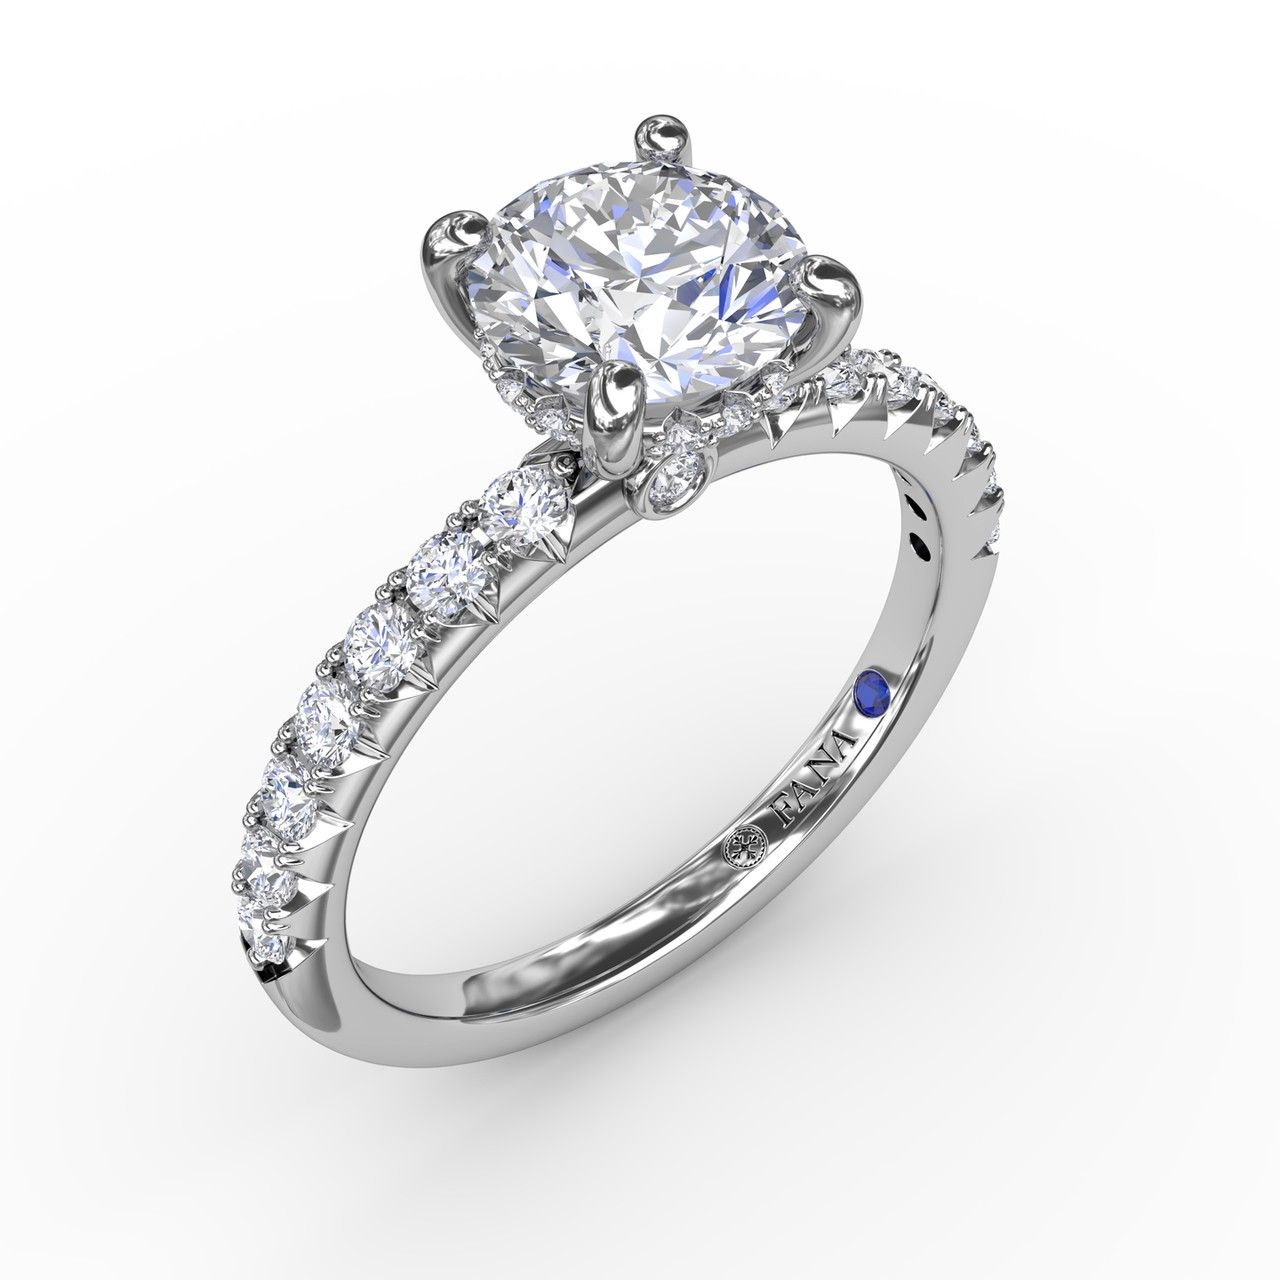 14K WHITE GOLD HIDDEN HALO SEMI-MOUNT RING SIZE 6.5 WITH 28=0.42TW ROUND G-H VS2-SI1 DIAMONDS AND ONE ROUND BLUE SAPPHIRE   (2.74 GRAMS)